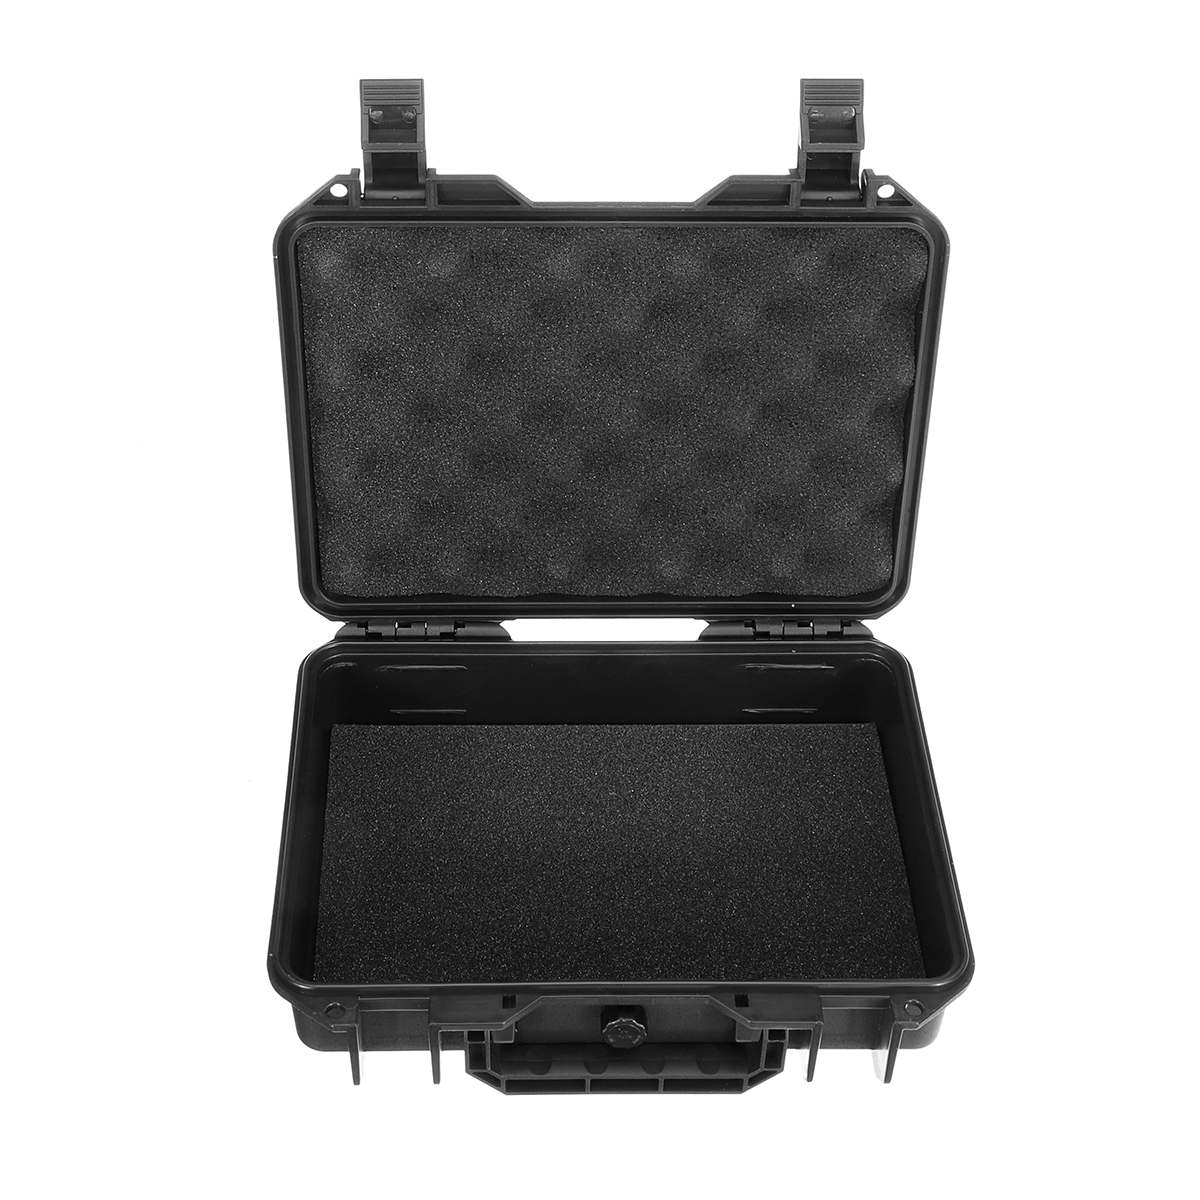 MG6235 Protective Safety Instrument Tool Box Waterproof Shockproof Storage Toolbox Sealed Tool Case Impact Resistant Suitcase